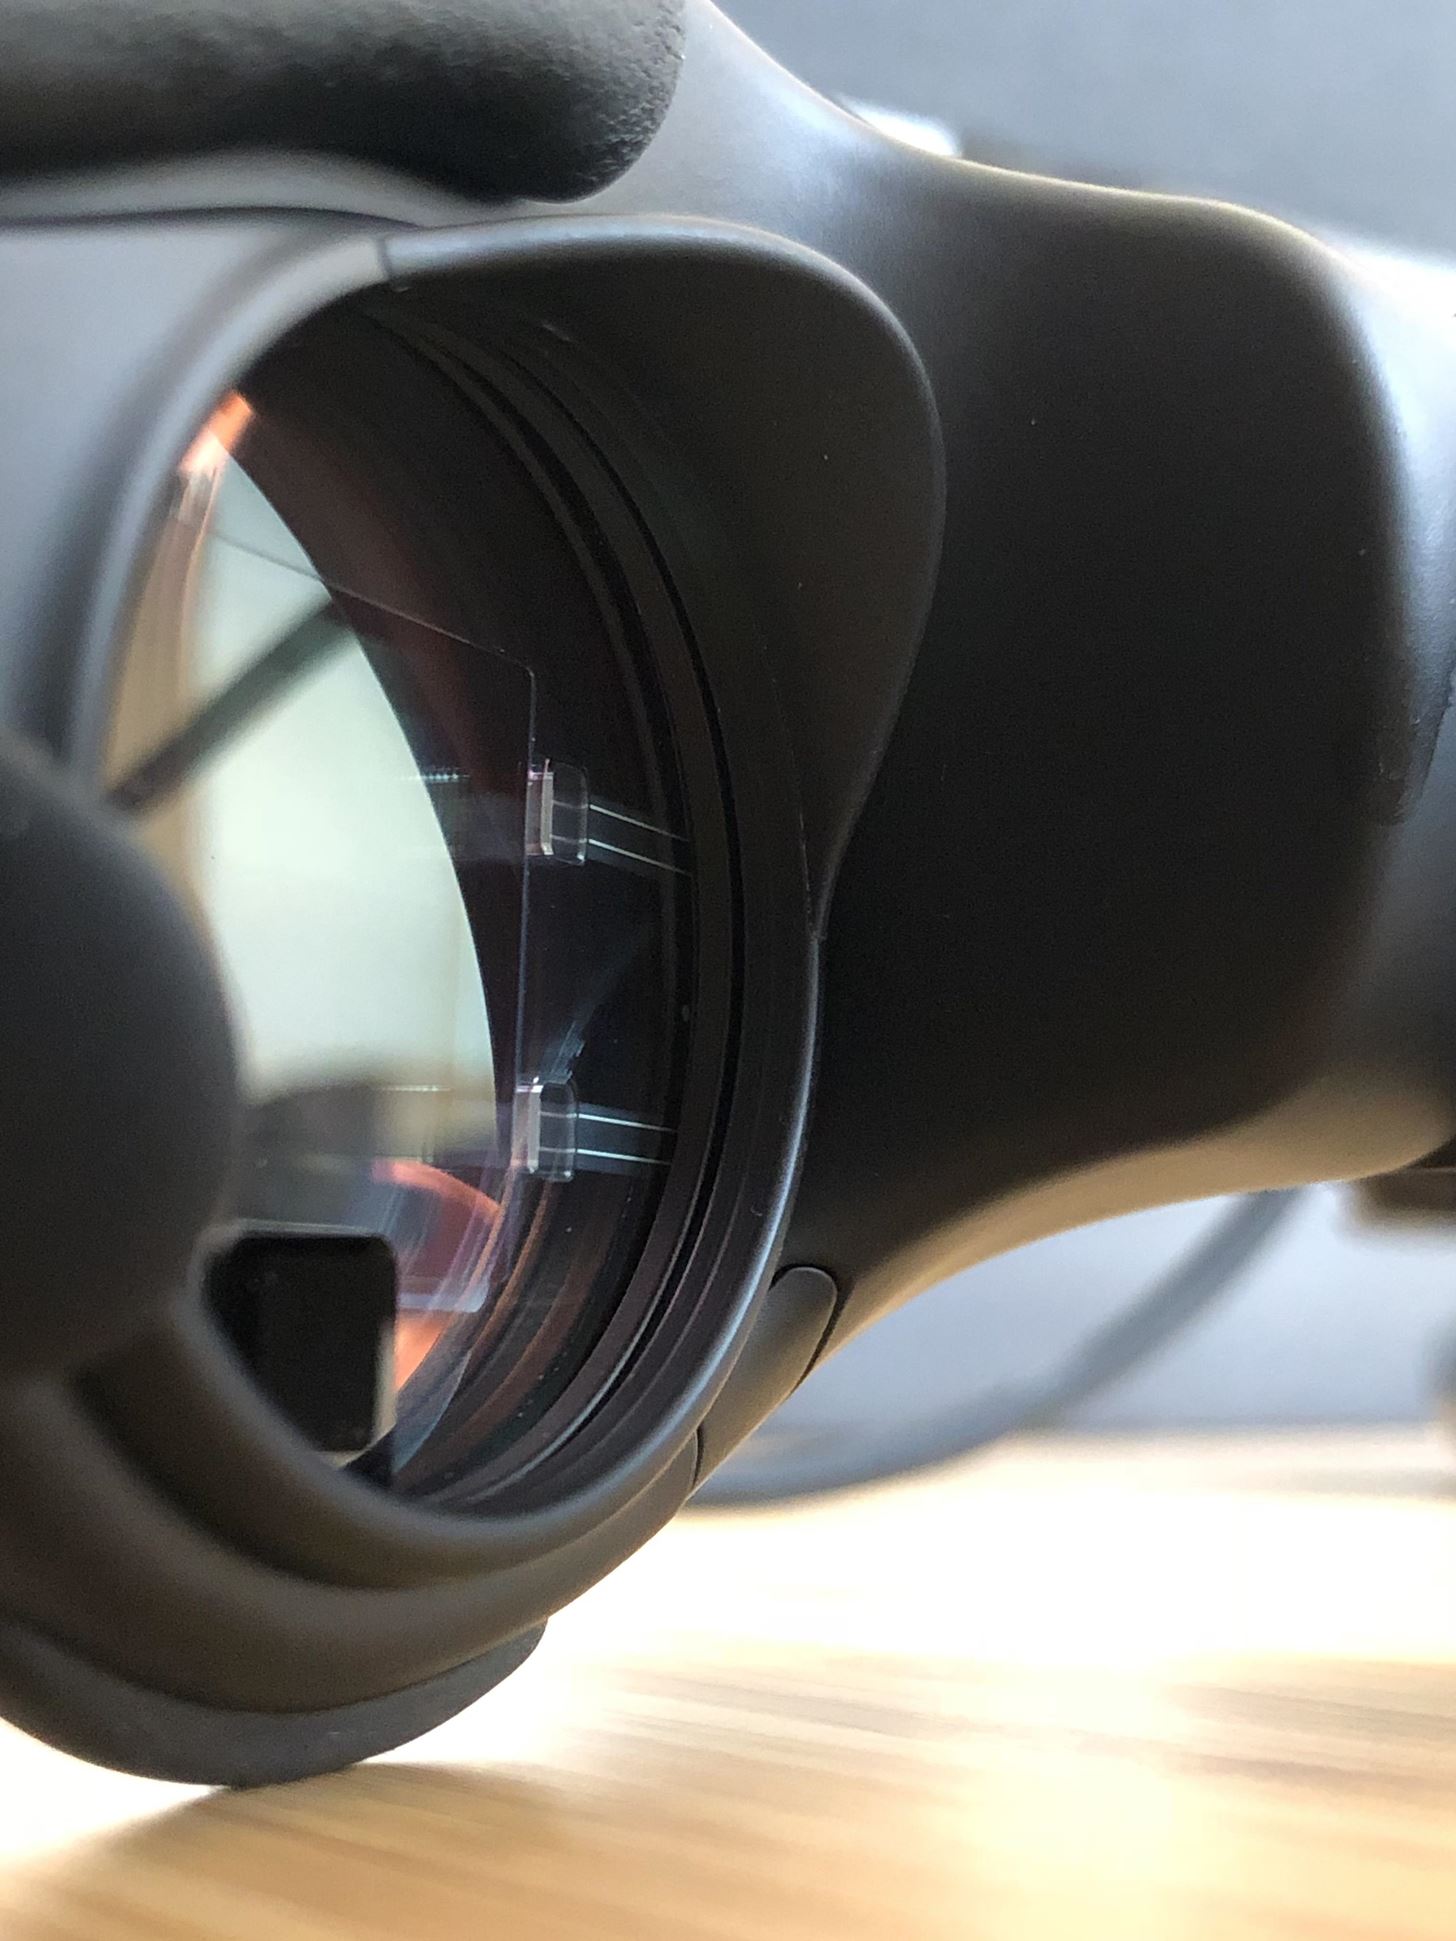 Gallery: A Close-Up Look at the Magic Leap One's Optics